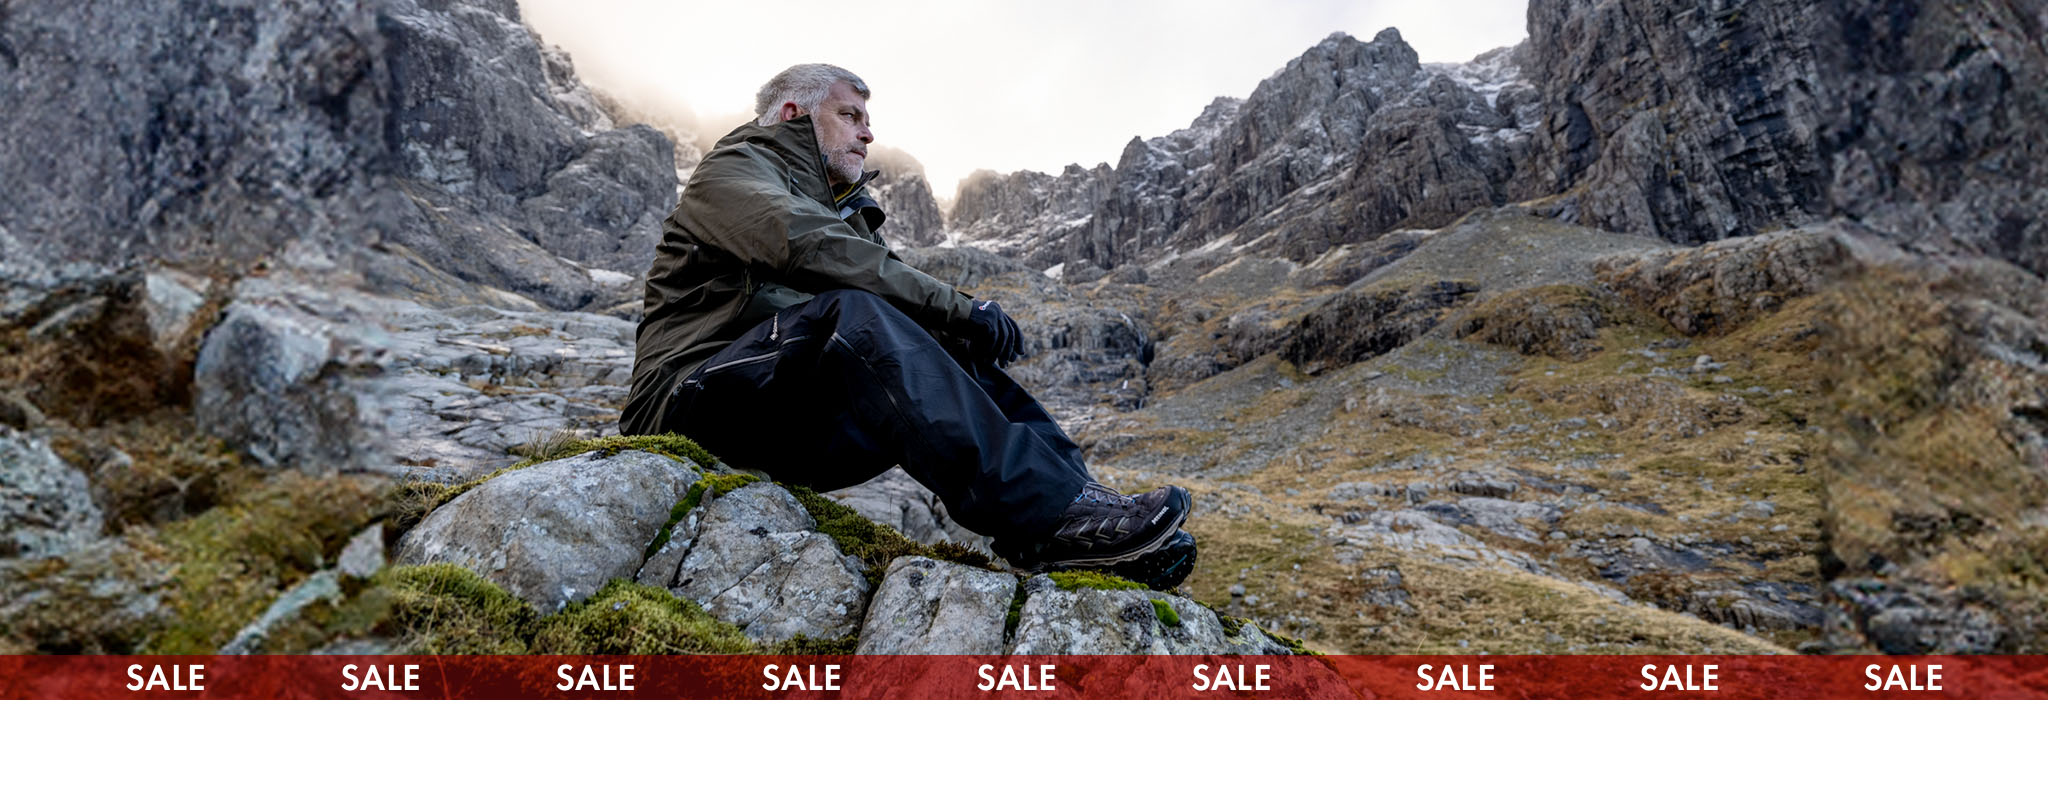 Sale on Outdoor Clothing, Footwear, and Equipment